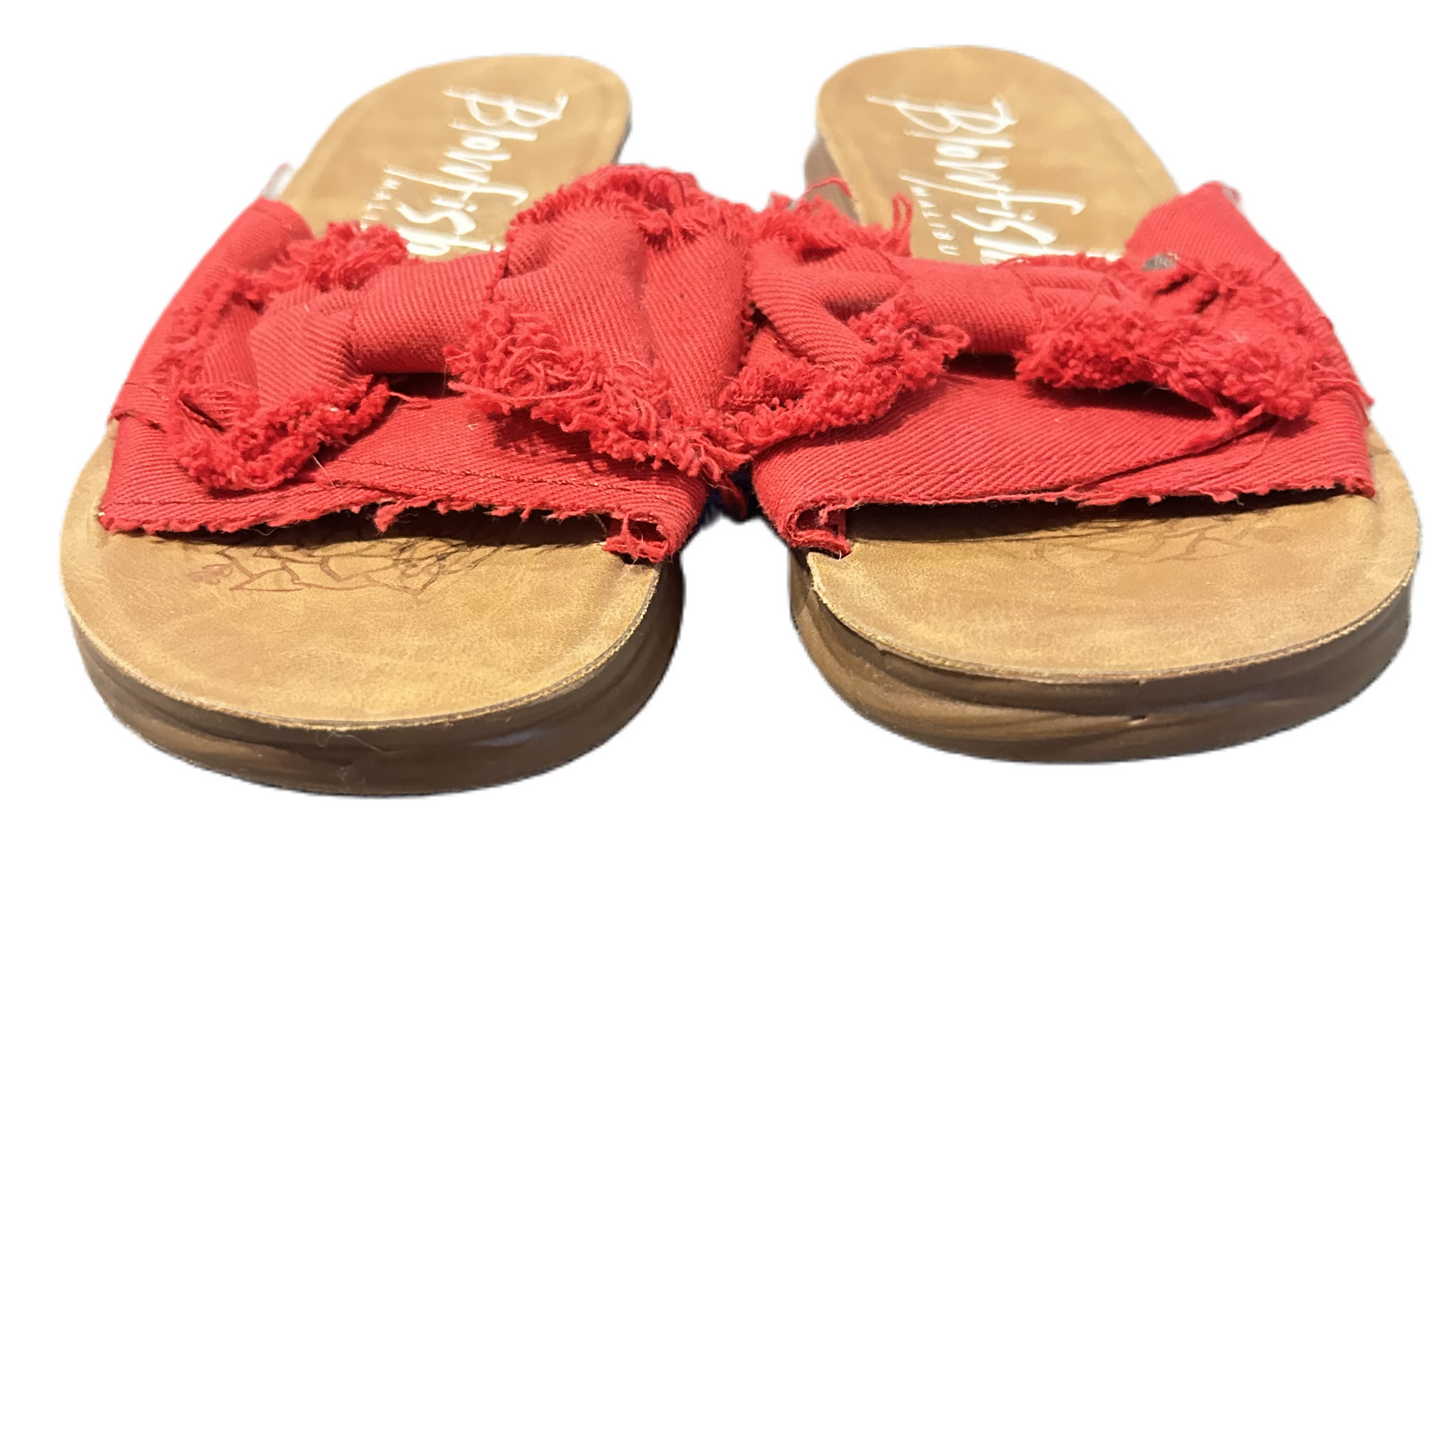 Red Shoes Flats By Blowfish, Size: 8